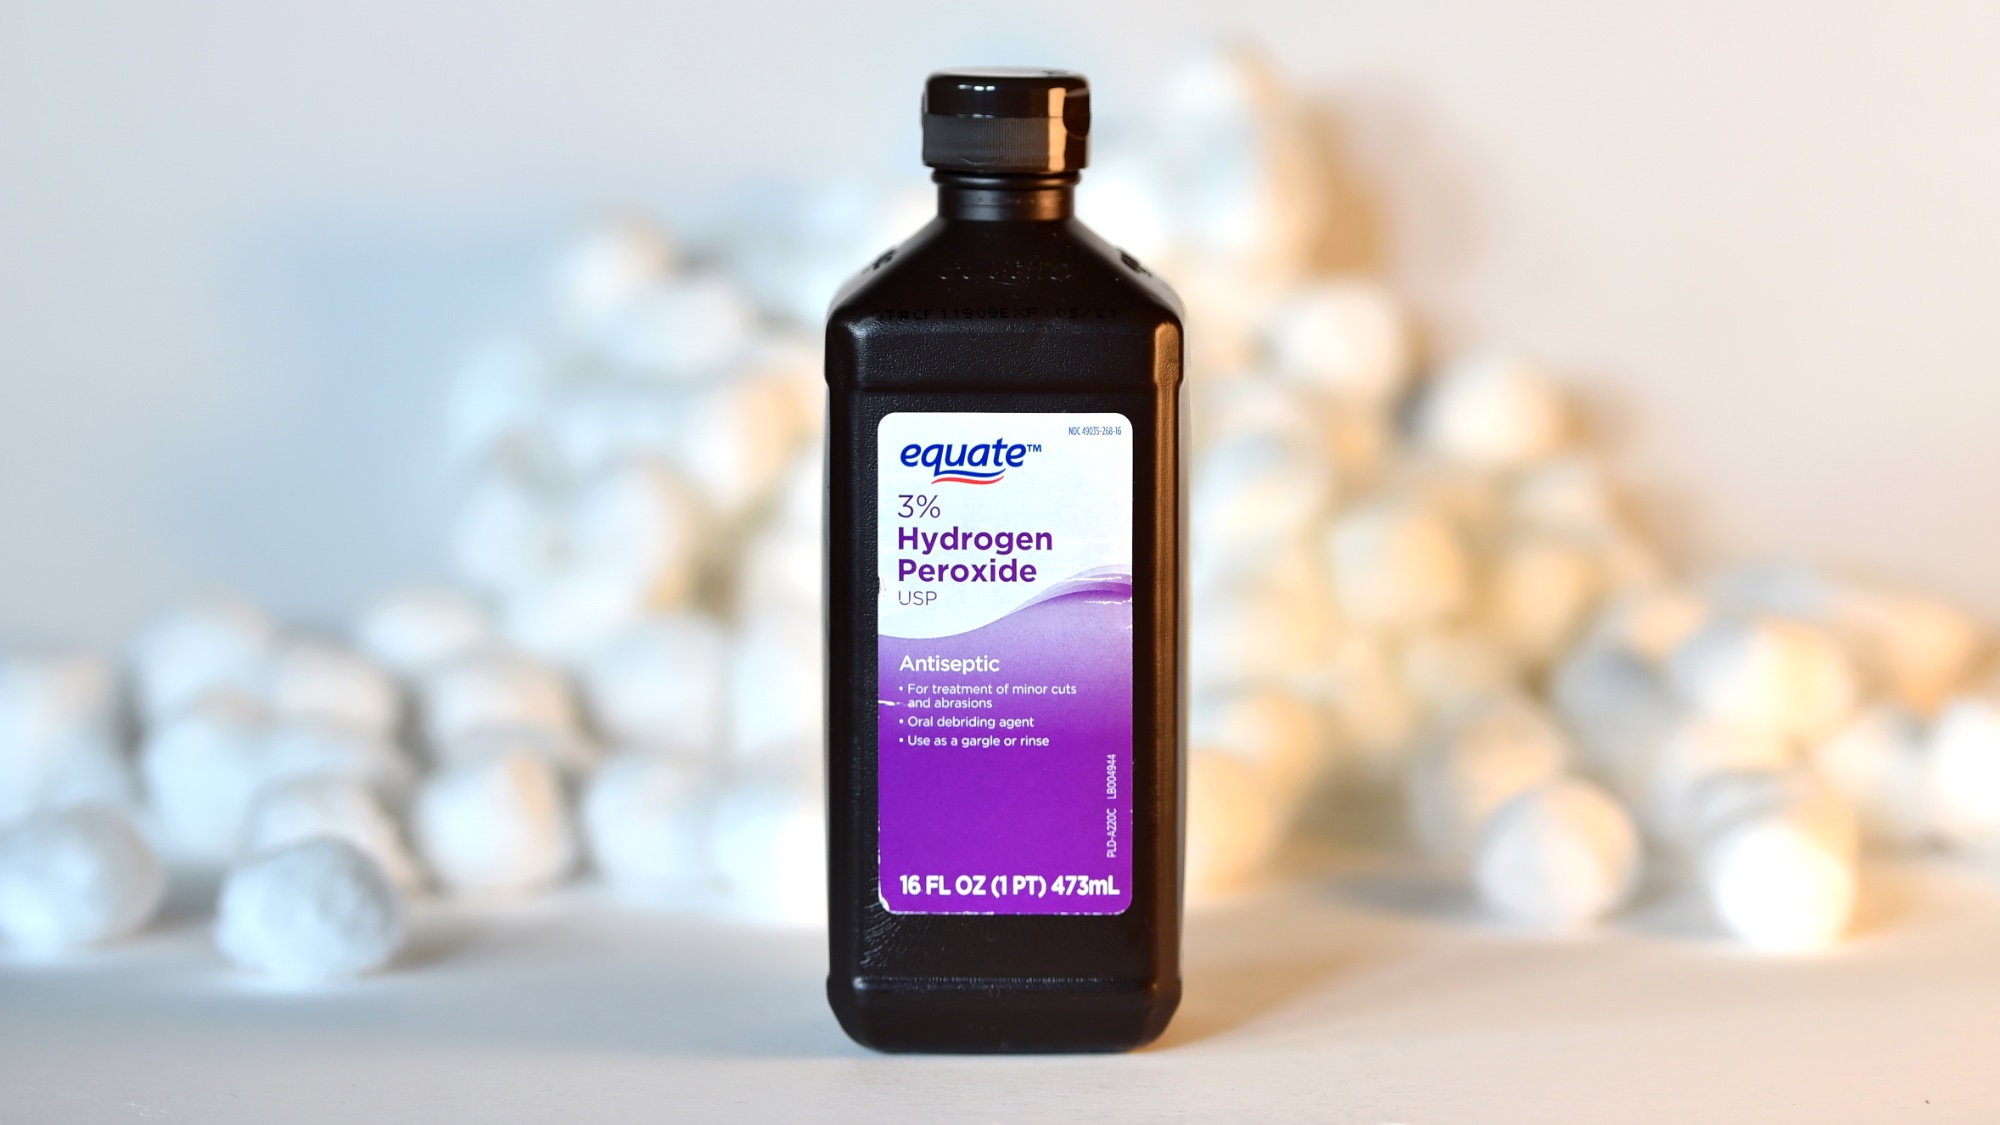 7 ways you didn’t know you could use hydrogen peroxide | Tom's Guide